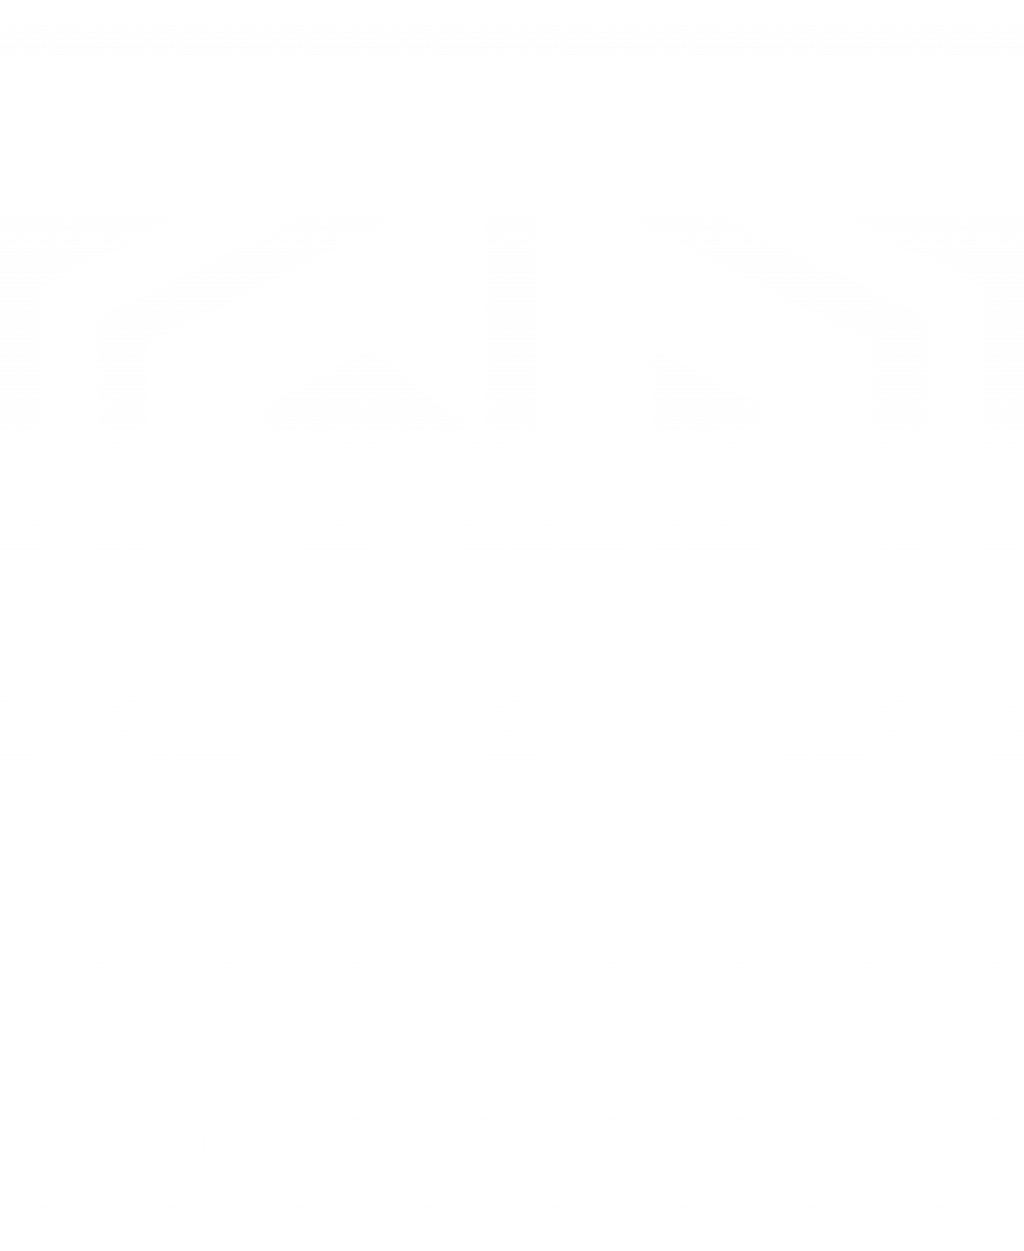 Endpoint CeX